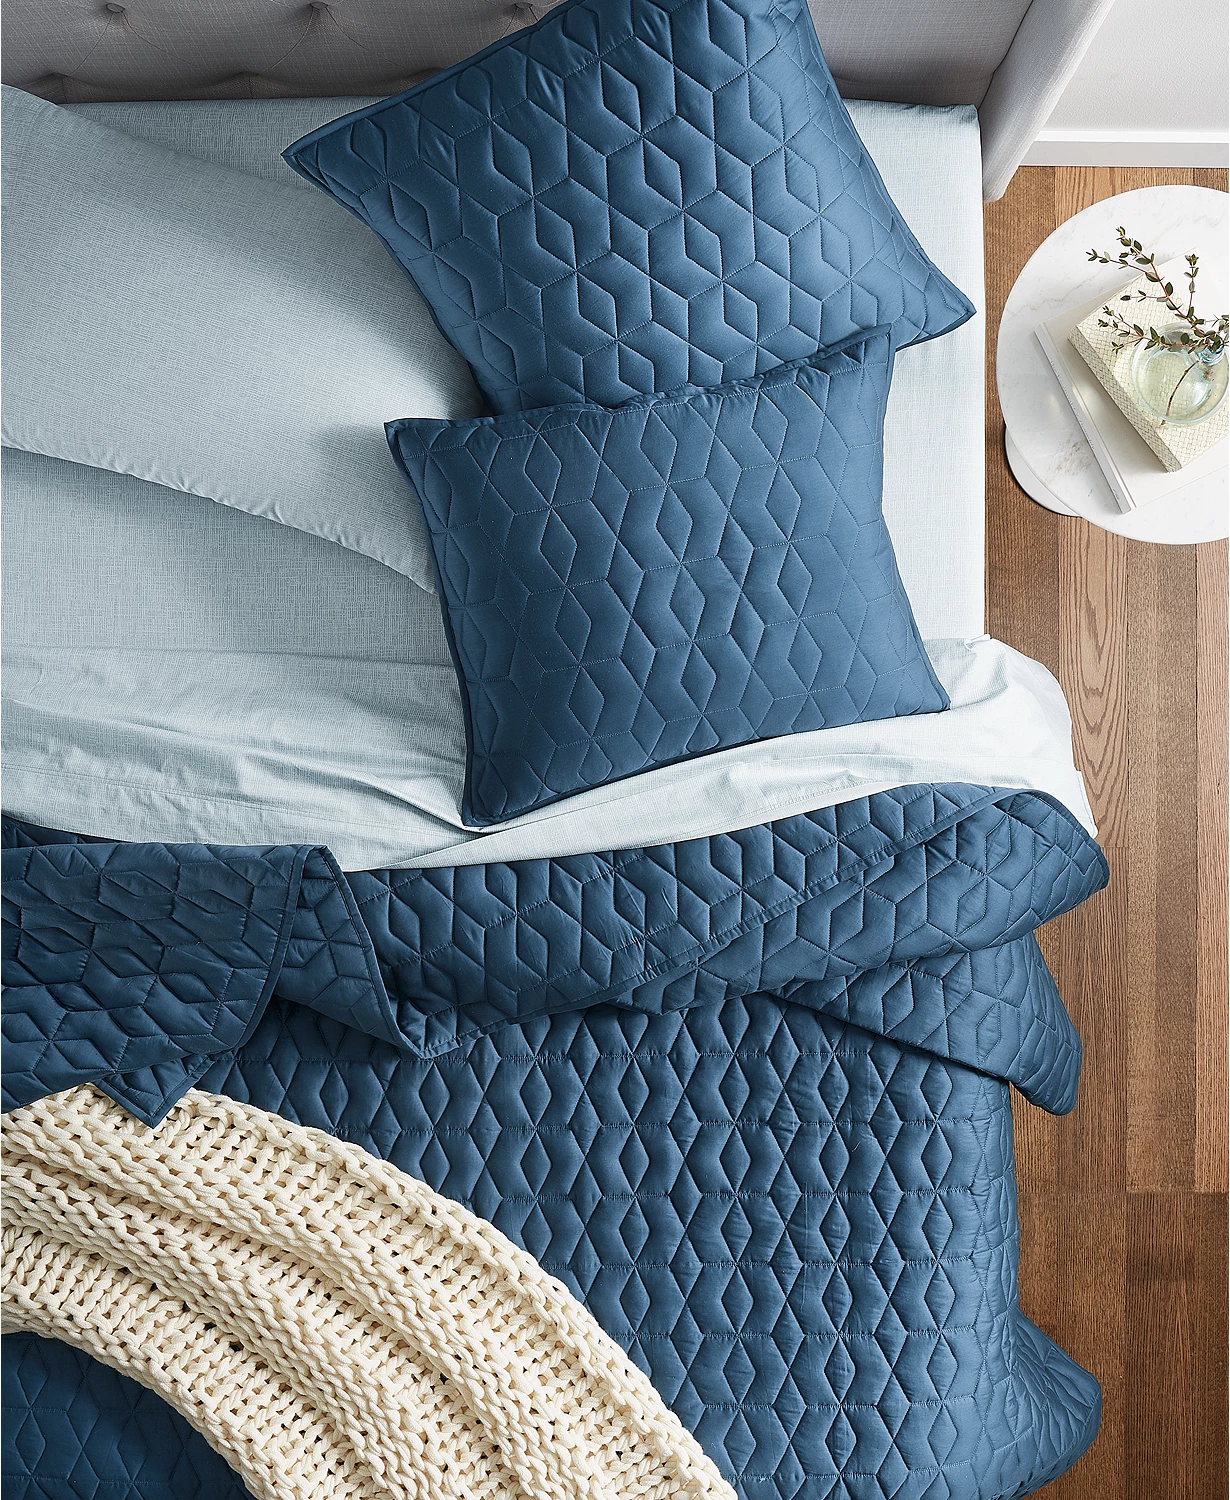 Macy’s: Up to 75% off Oake Bedding and Bath